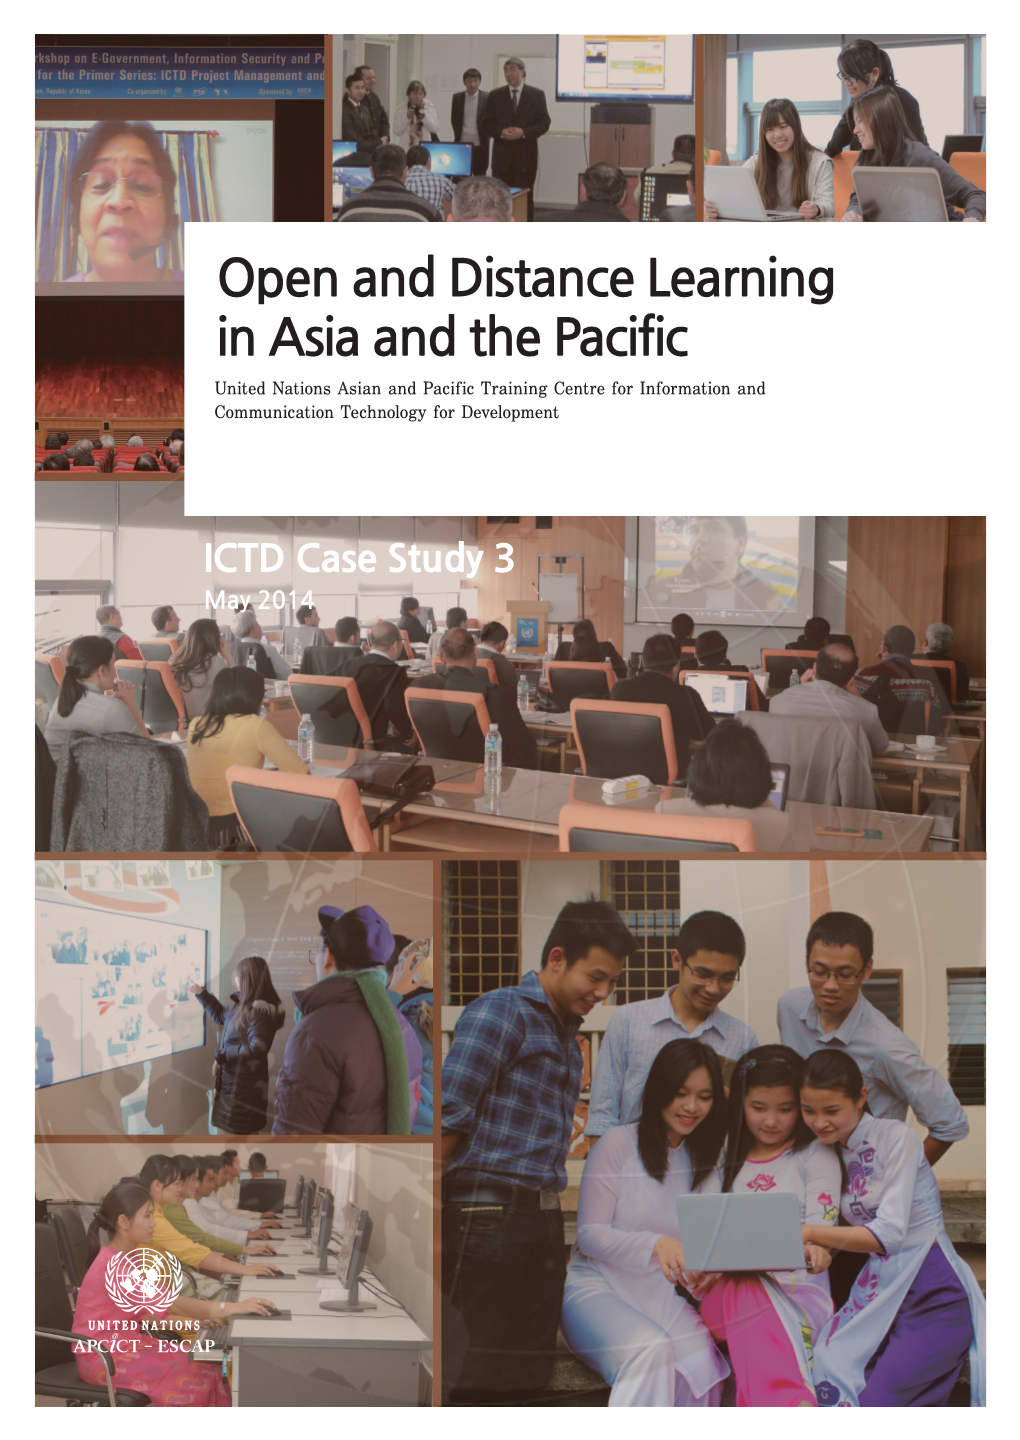 Open and Distance Learning in Asia and the Pacific United Nations Asian and Pacific Training Centre for Information and Communication Technology for Development